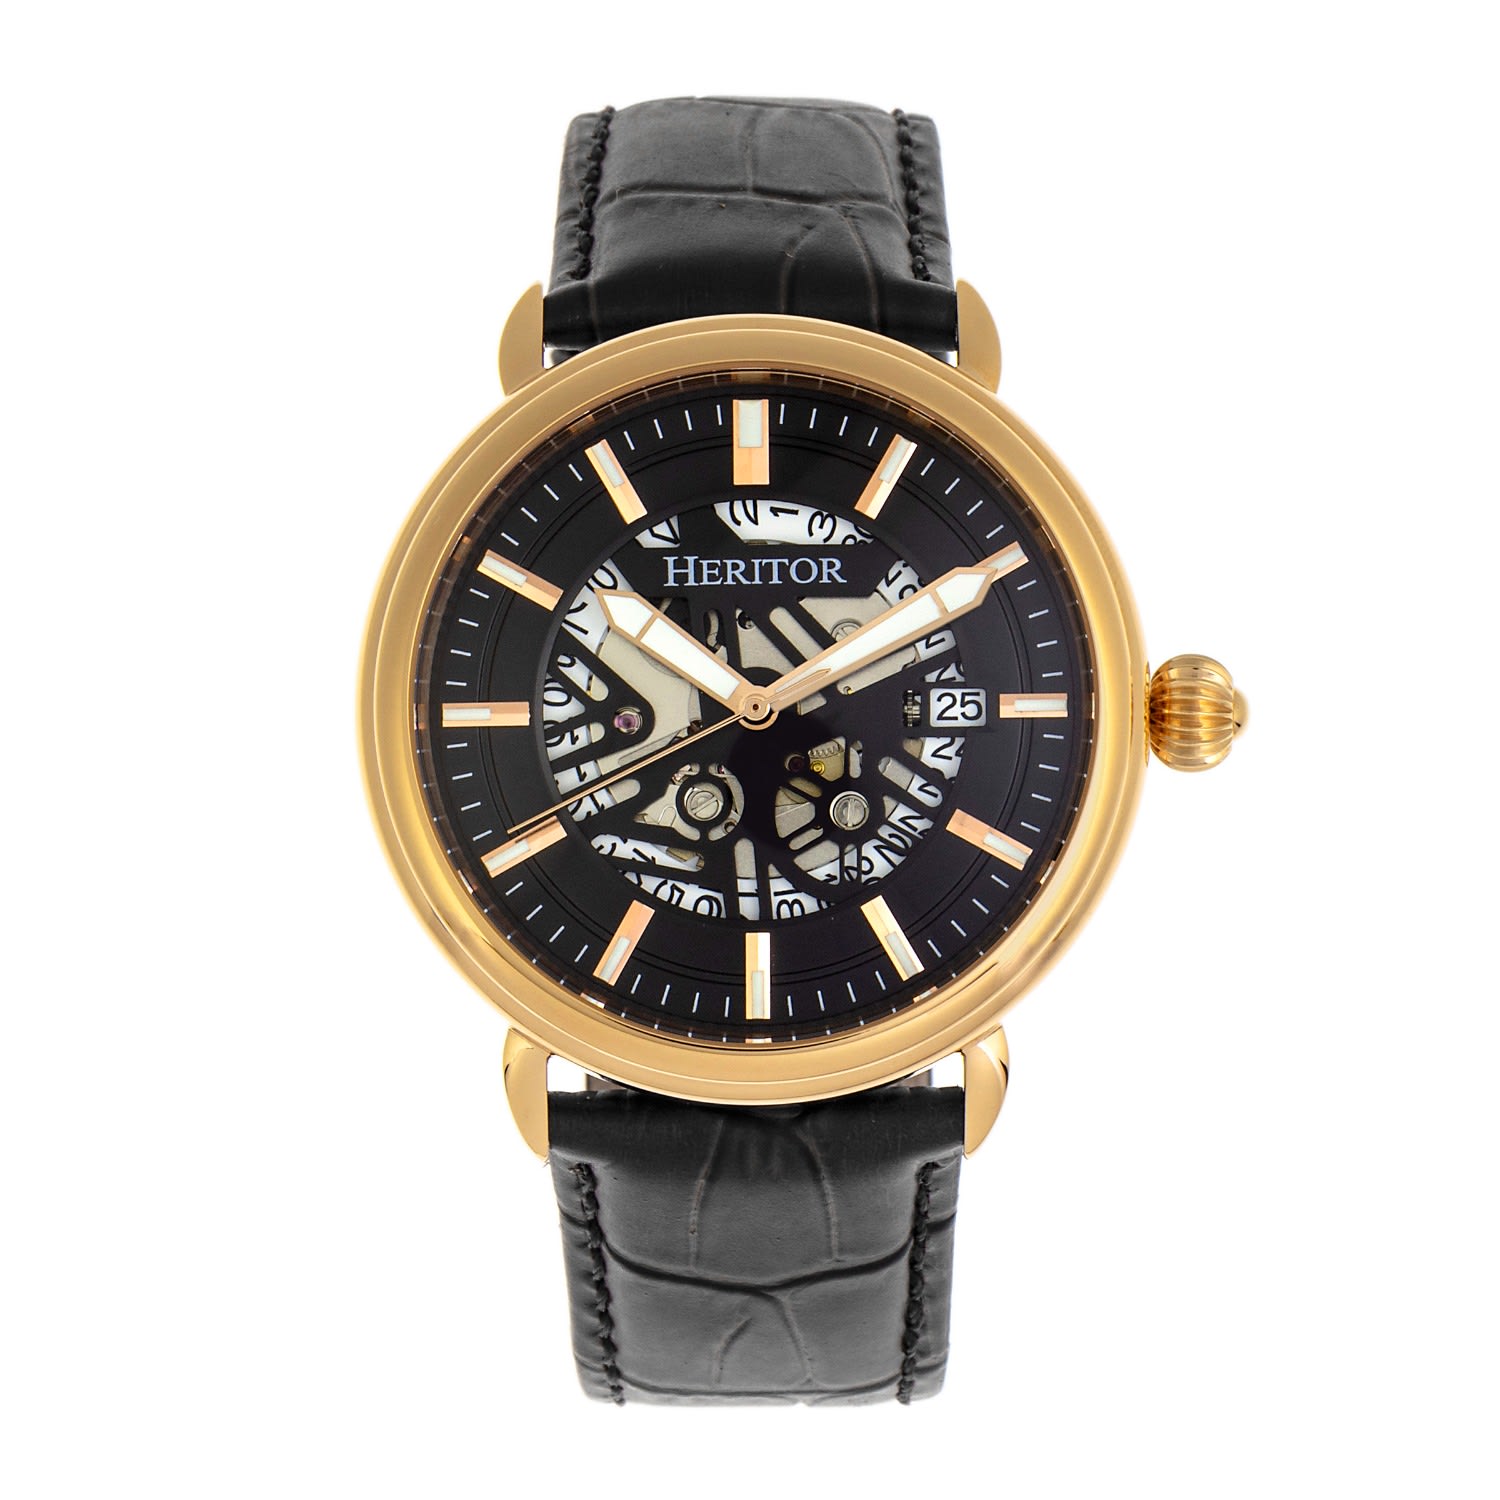 Men’s Gold / Black Mattias Semi-Skeleton Leather-Band Watch With Date - Black, Gold One Size Heritor Automatic